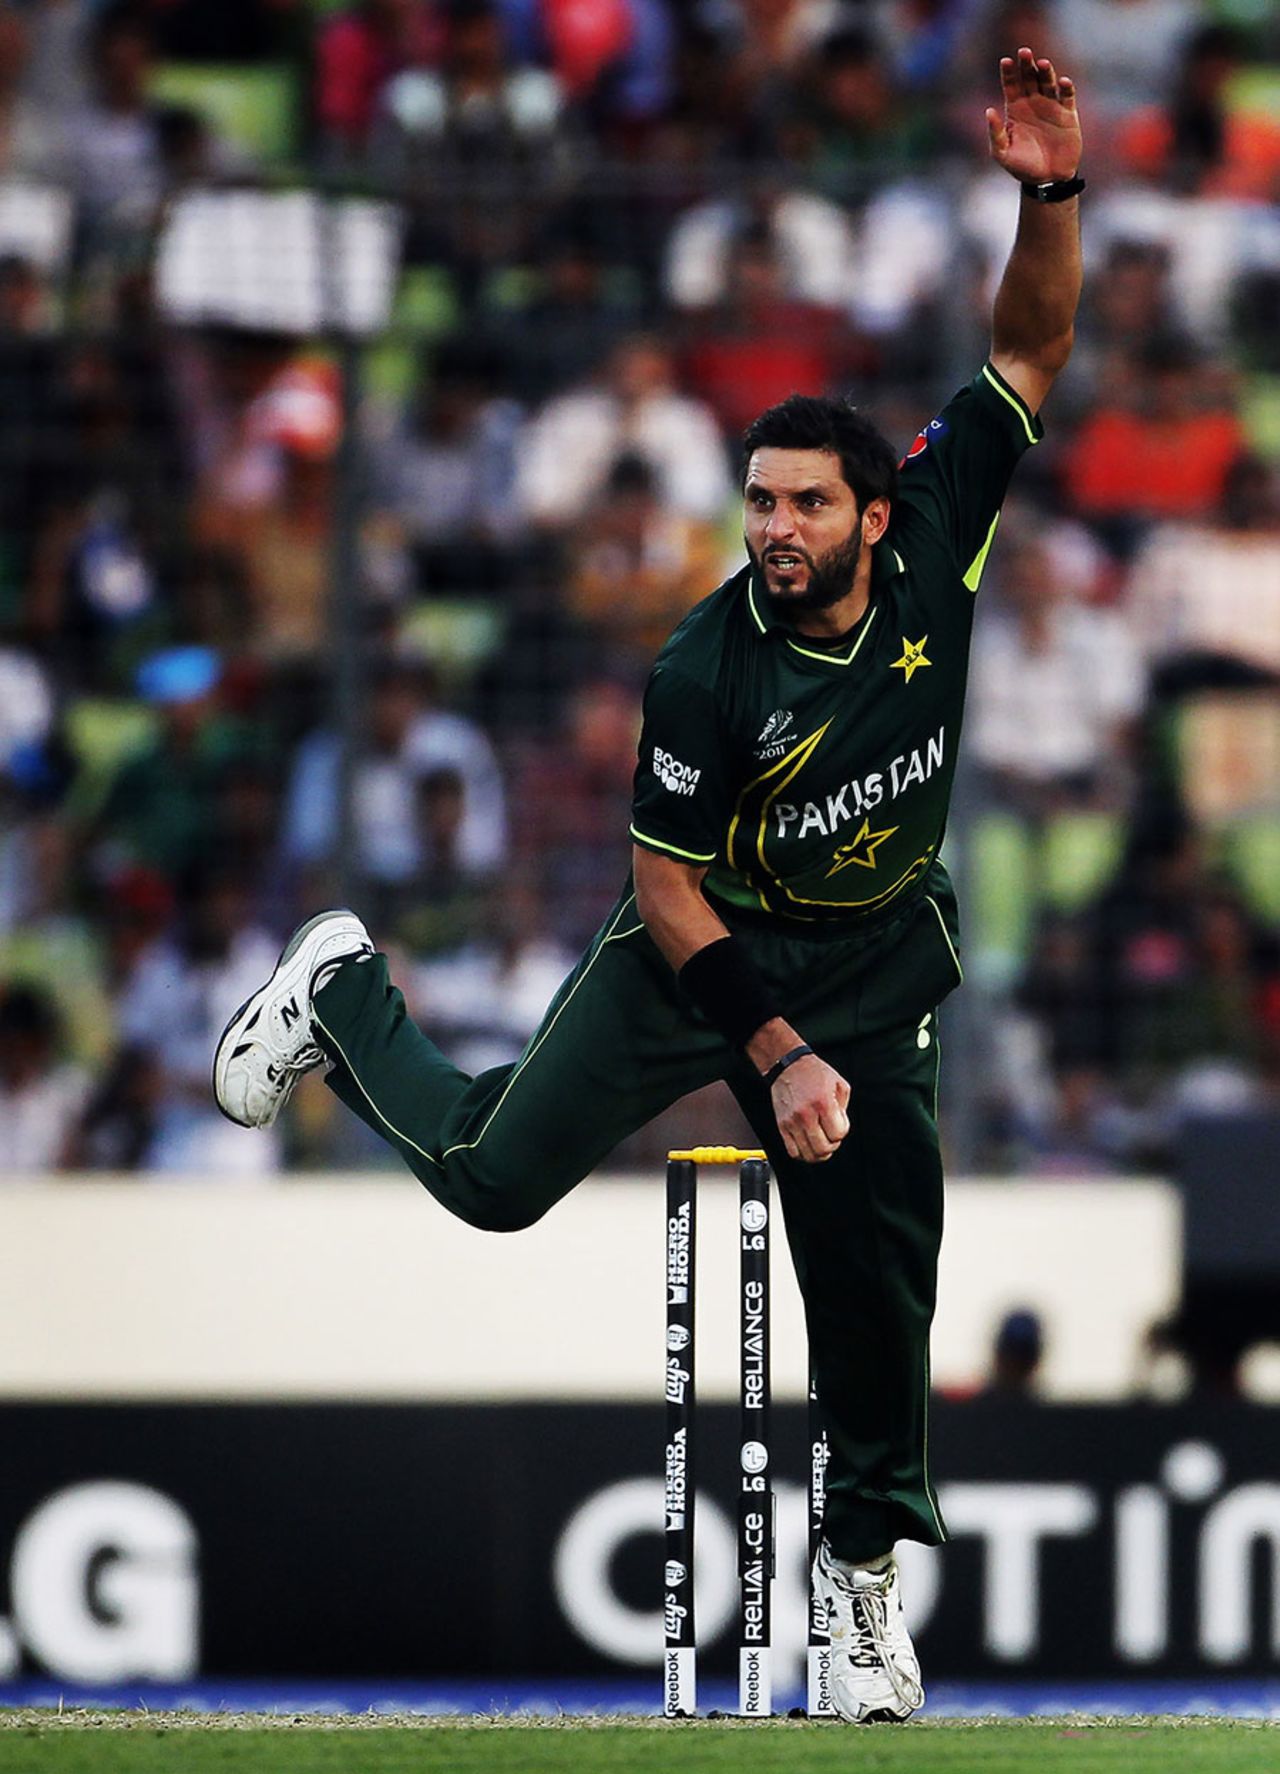 Shahid Afridi after his delivery stride, West Indies v Pakistan, 1st quarter-final, World Cup 2011, March 23, 2011